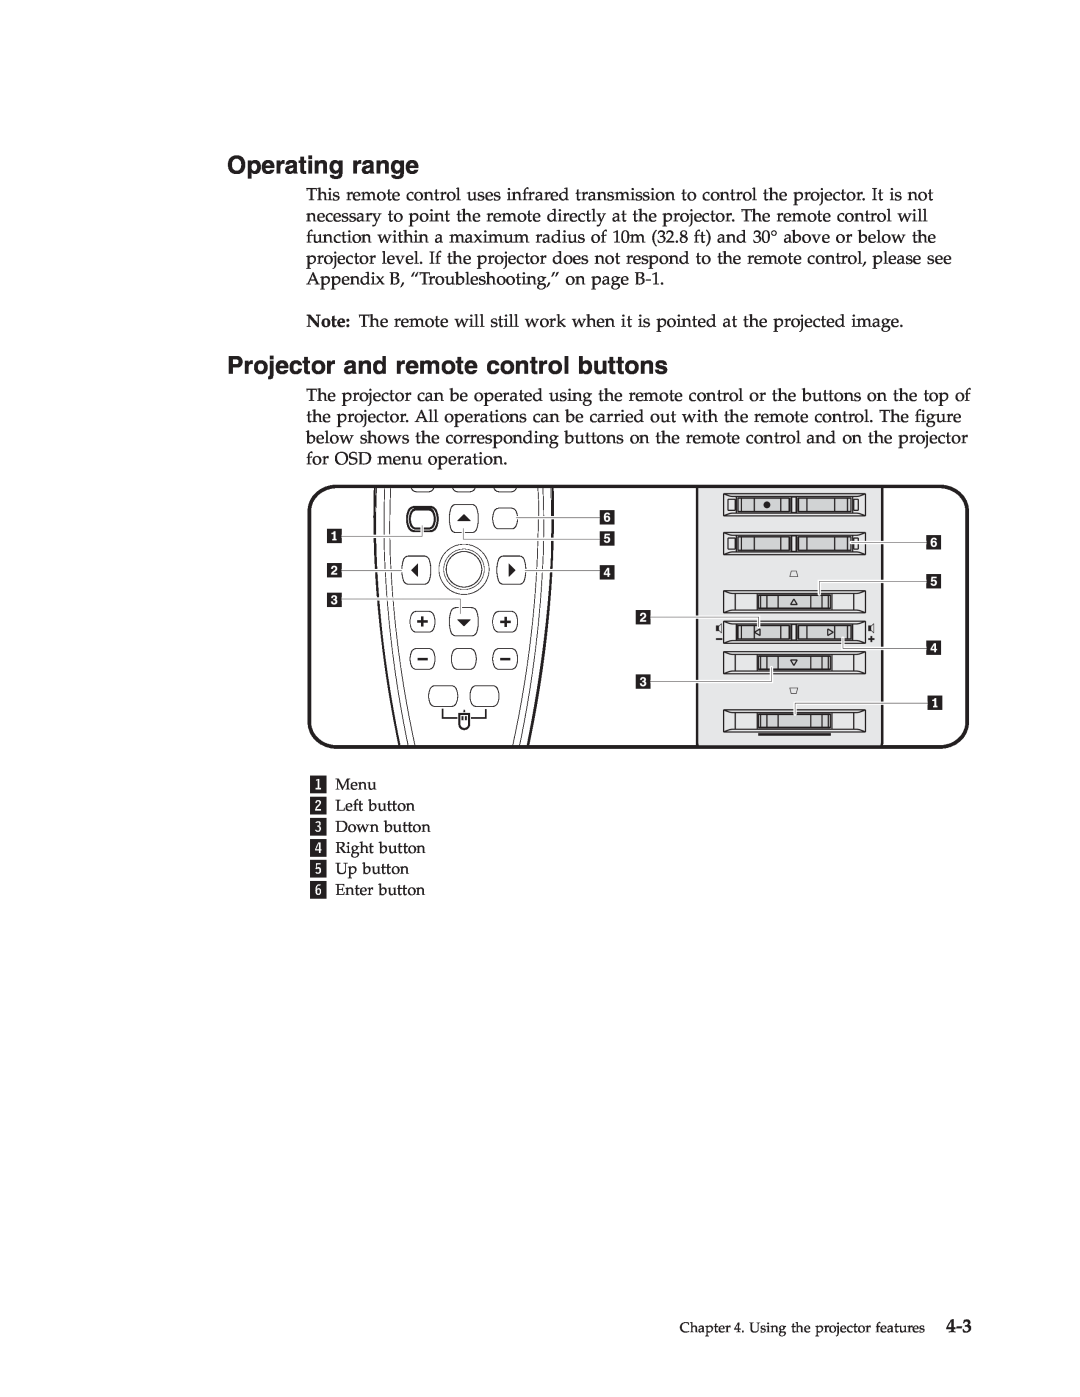 IBM PROJECTOR C400 manual Operating range, Projector and remote control buttons, 1 Menu 